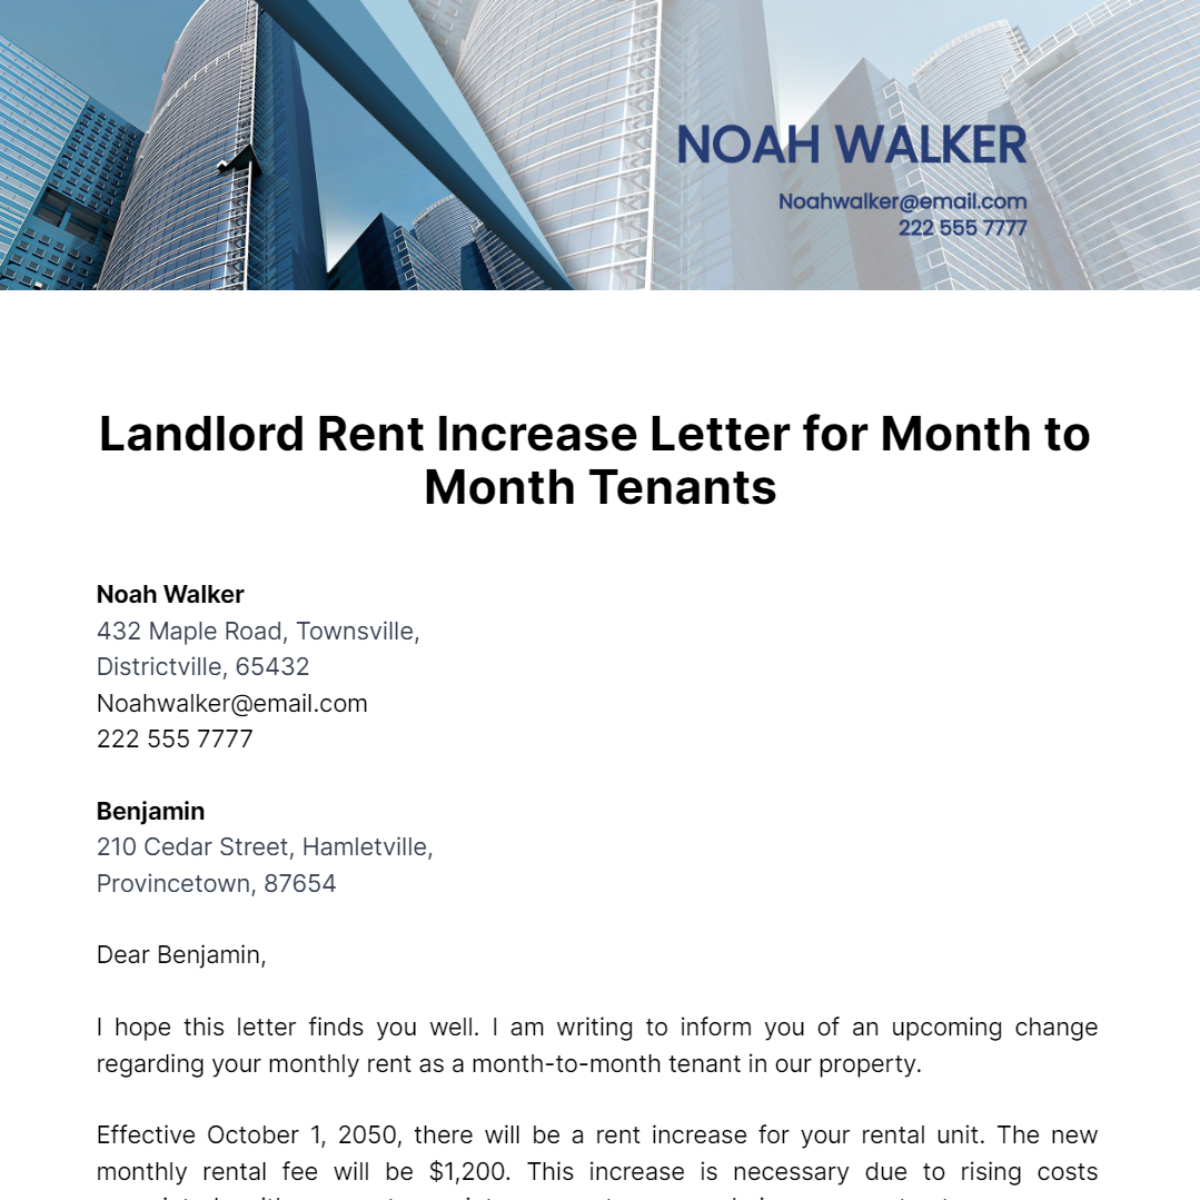 Landlord Rent Increase Letter for Month to Month Tenants Template